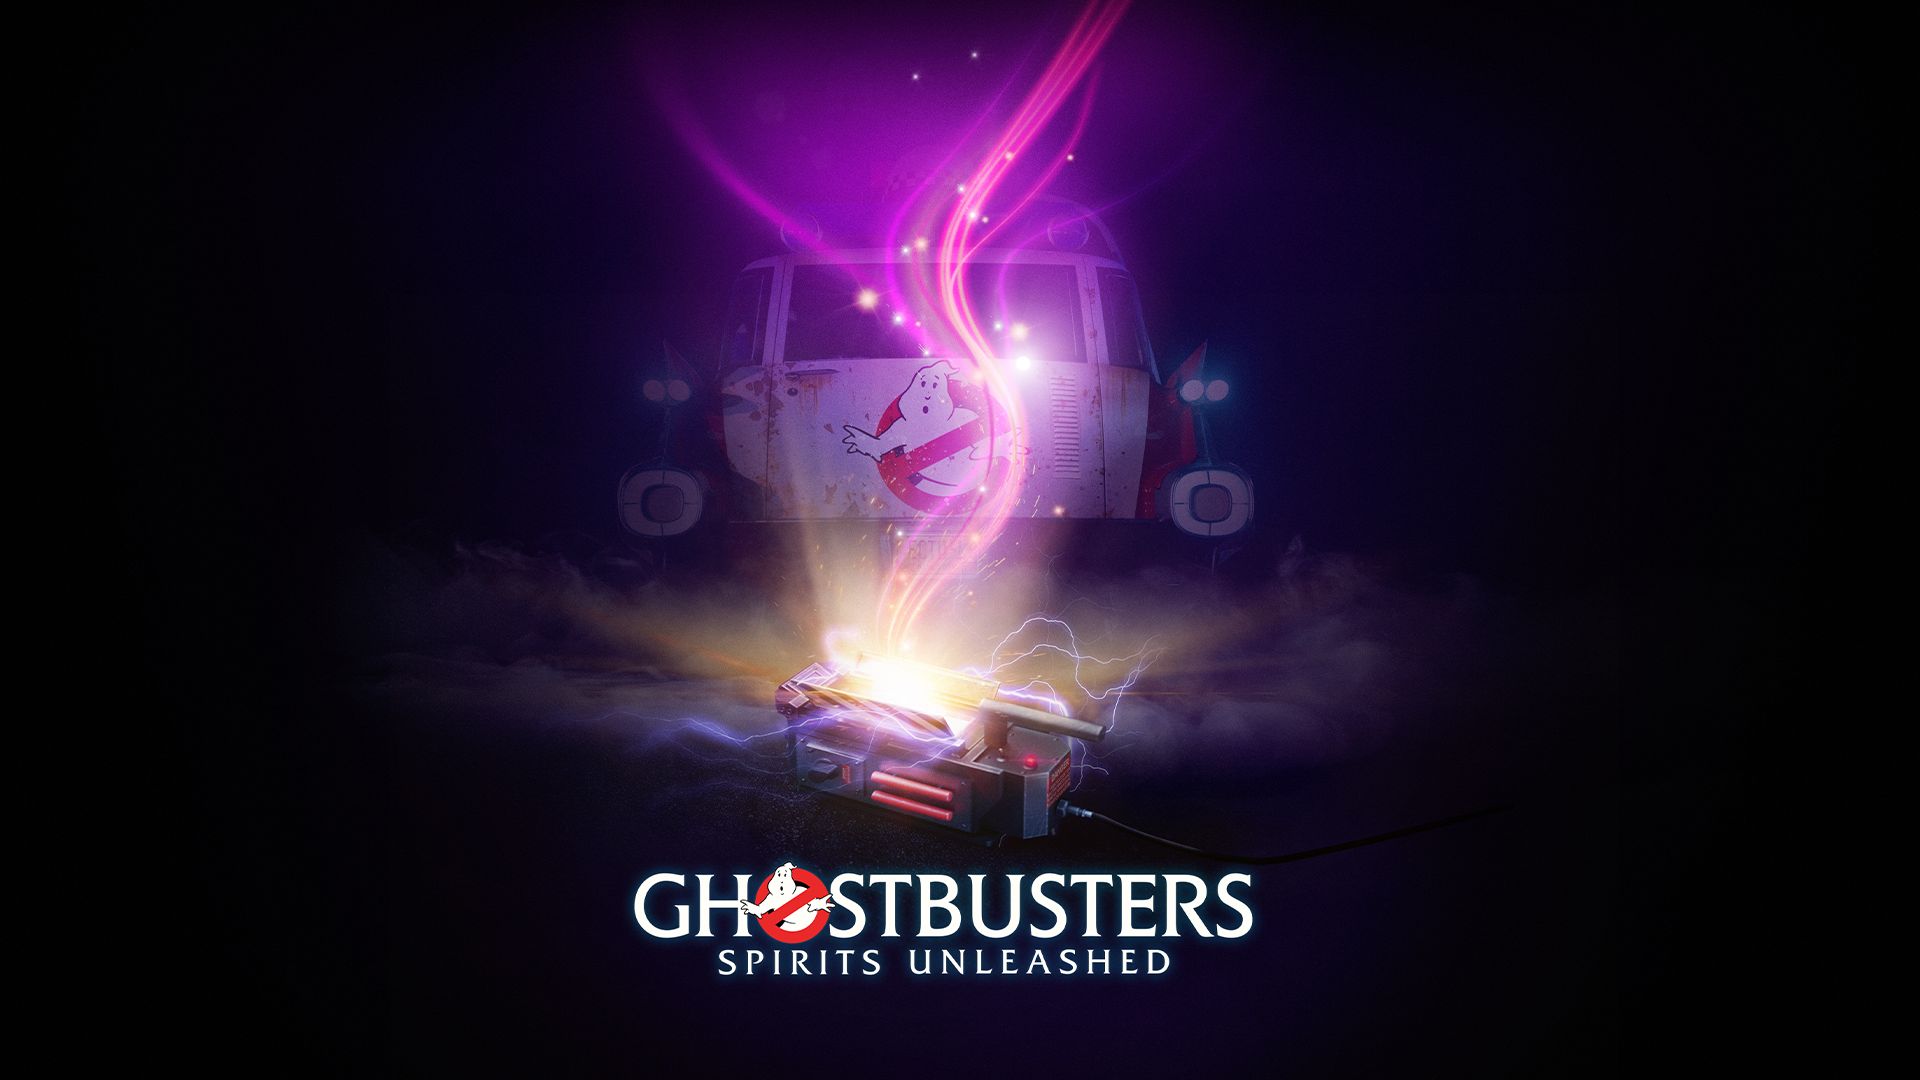 Ghostbusters – Spirits Unleashed